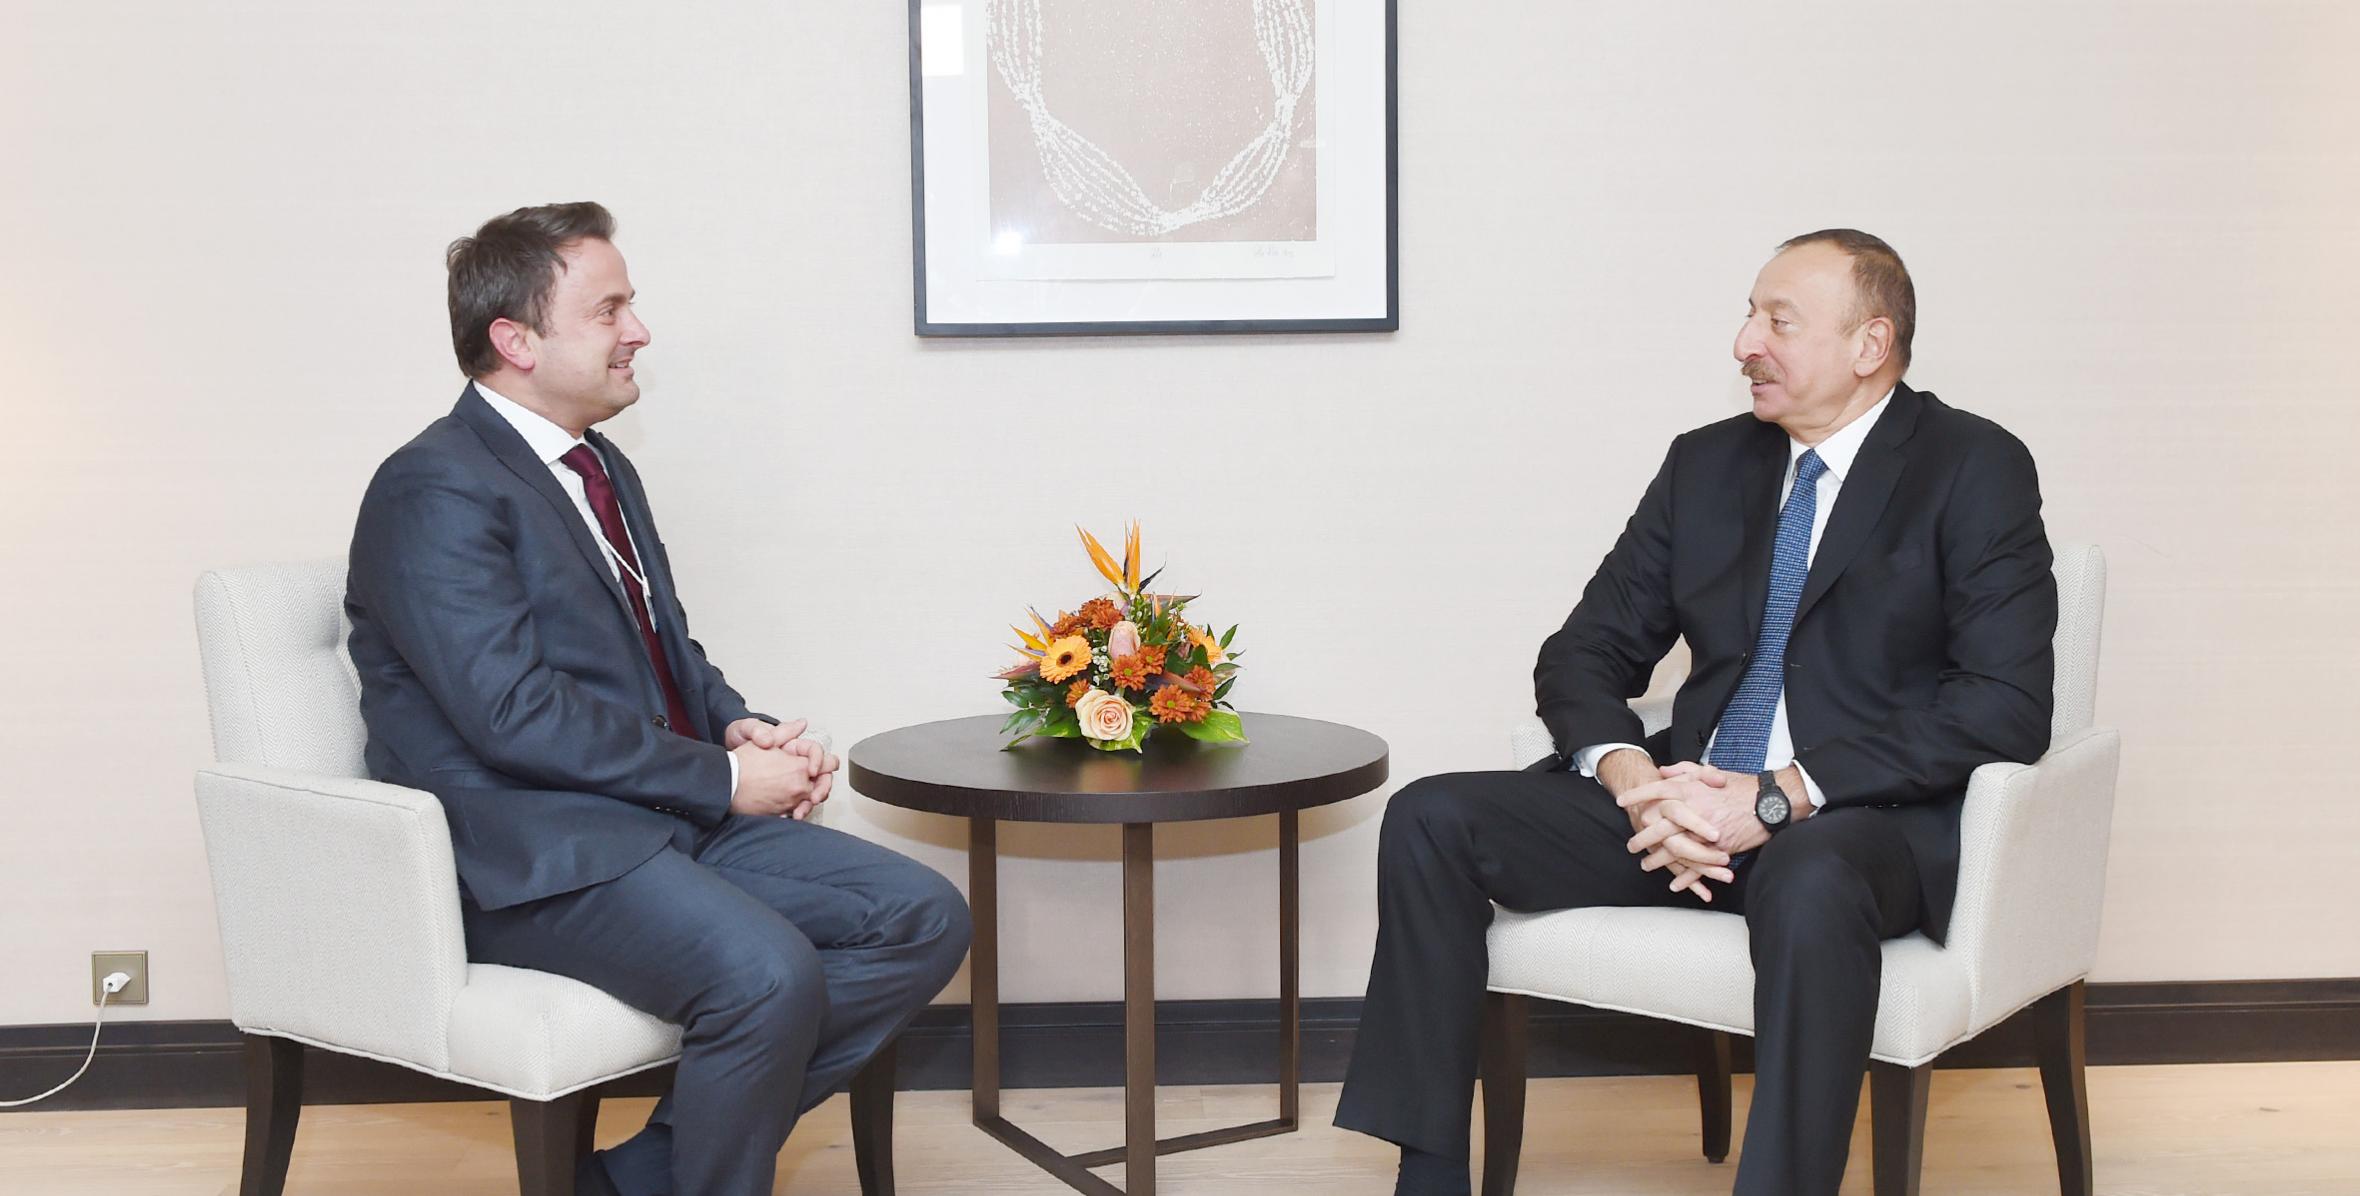 Ilham Aliyev met with Prime Minister, Minister of State of Luxembourg Xavier Bettel